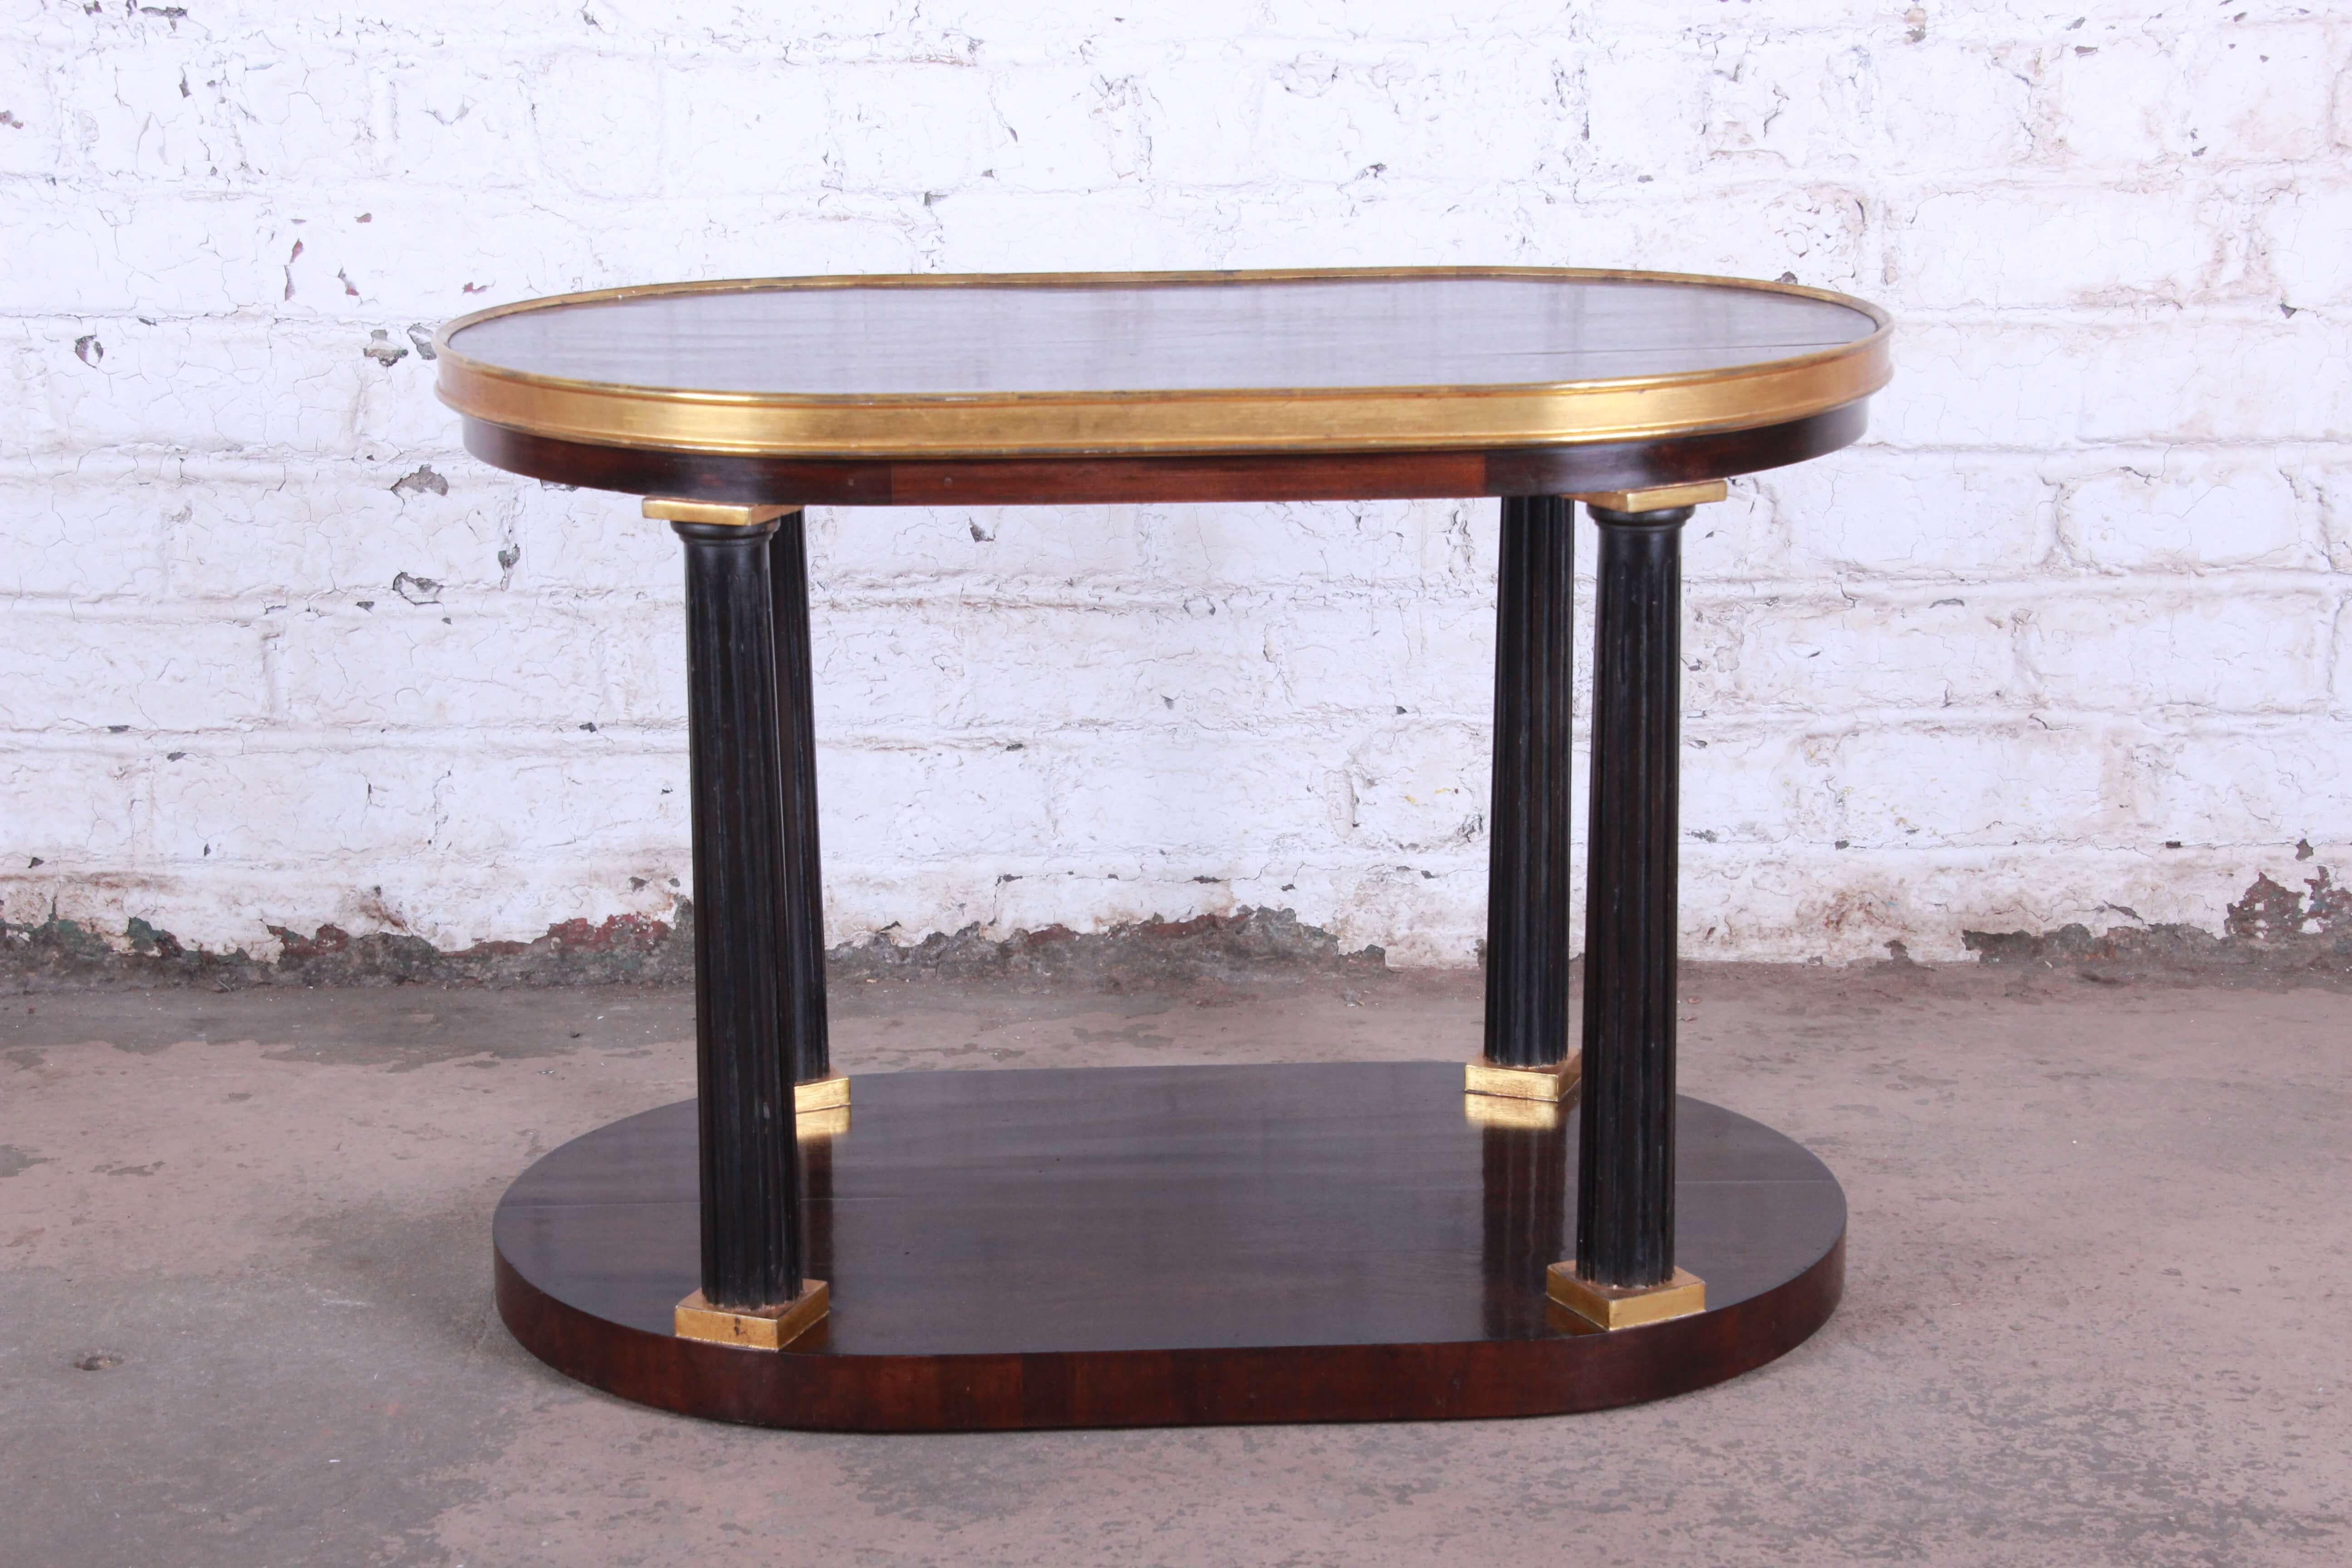 Offering an elegant Dessin Fournir neoclassical oval table. The table has a nice two-tiered design with dark brown shelves. The top has a gilt gold trim with ebonized columns. This very nice table is fit for any important space demand elegance and